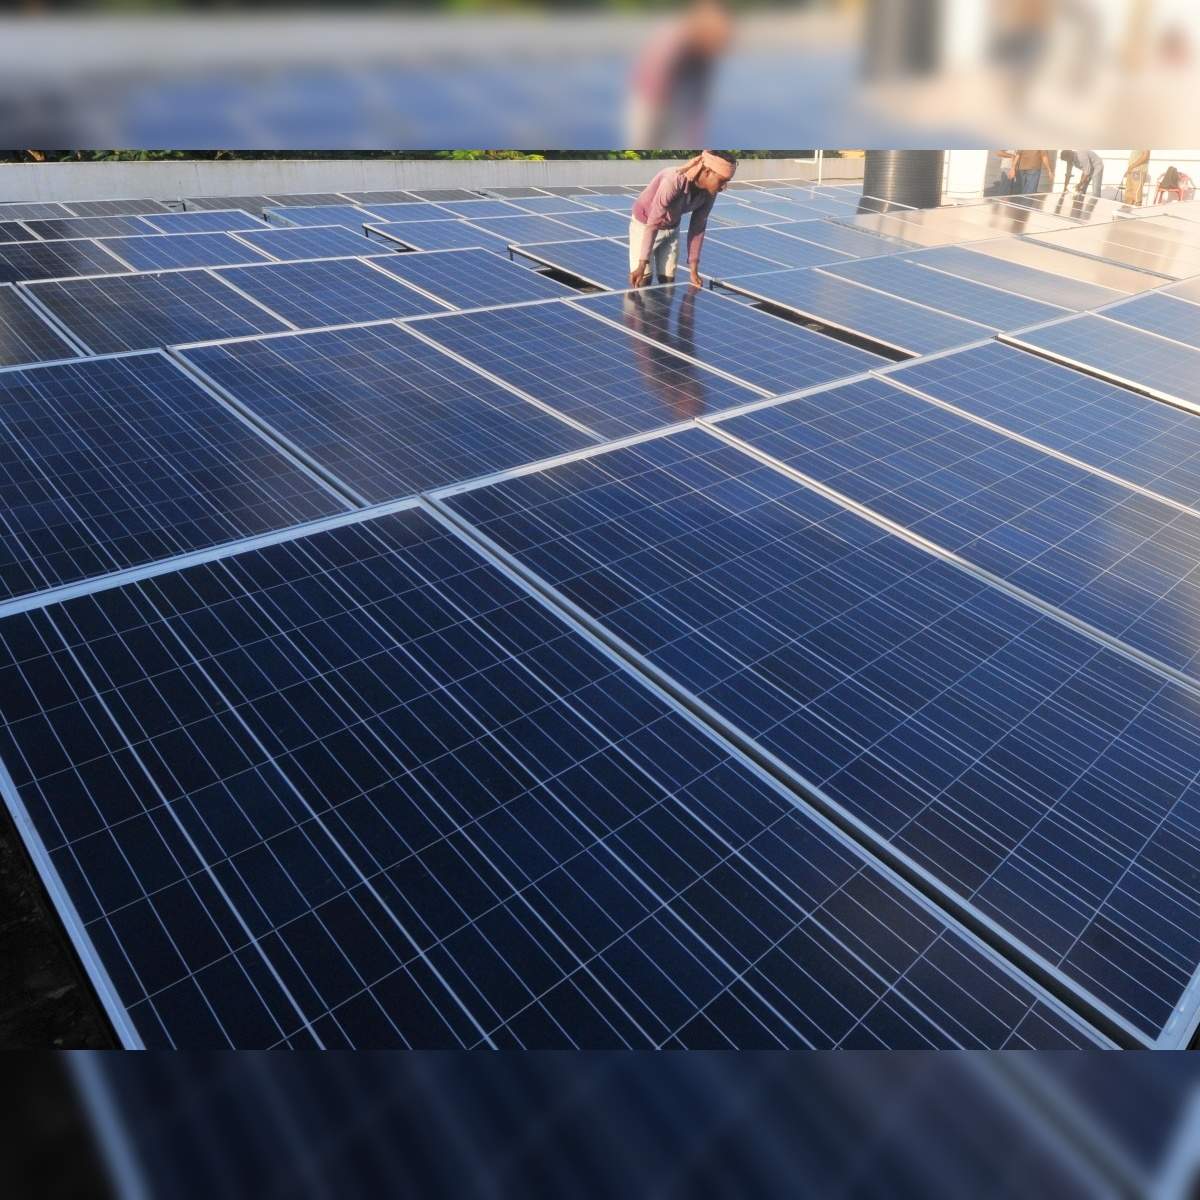 Solar Power Installations: Clean Energy for Sustainable Futures